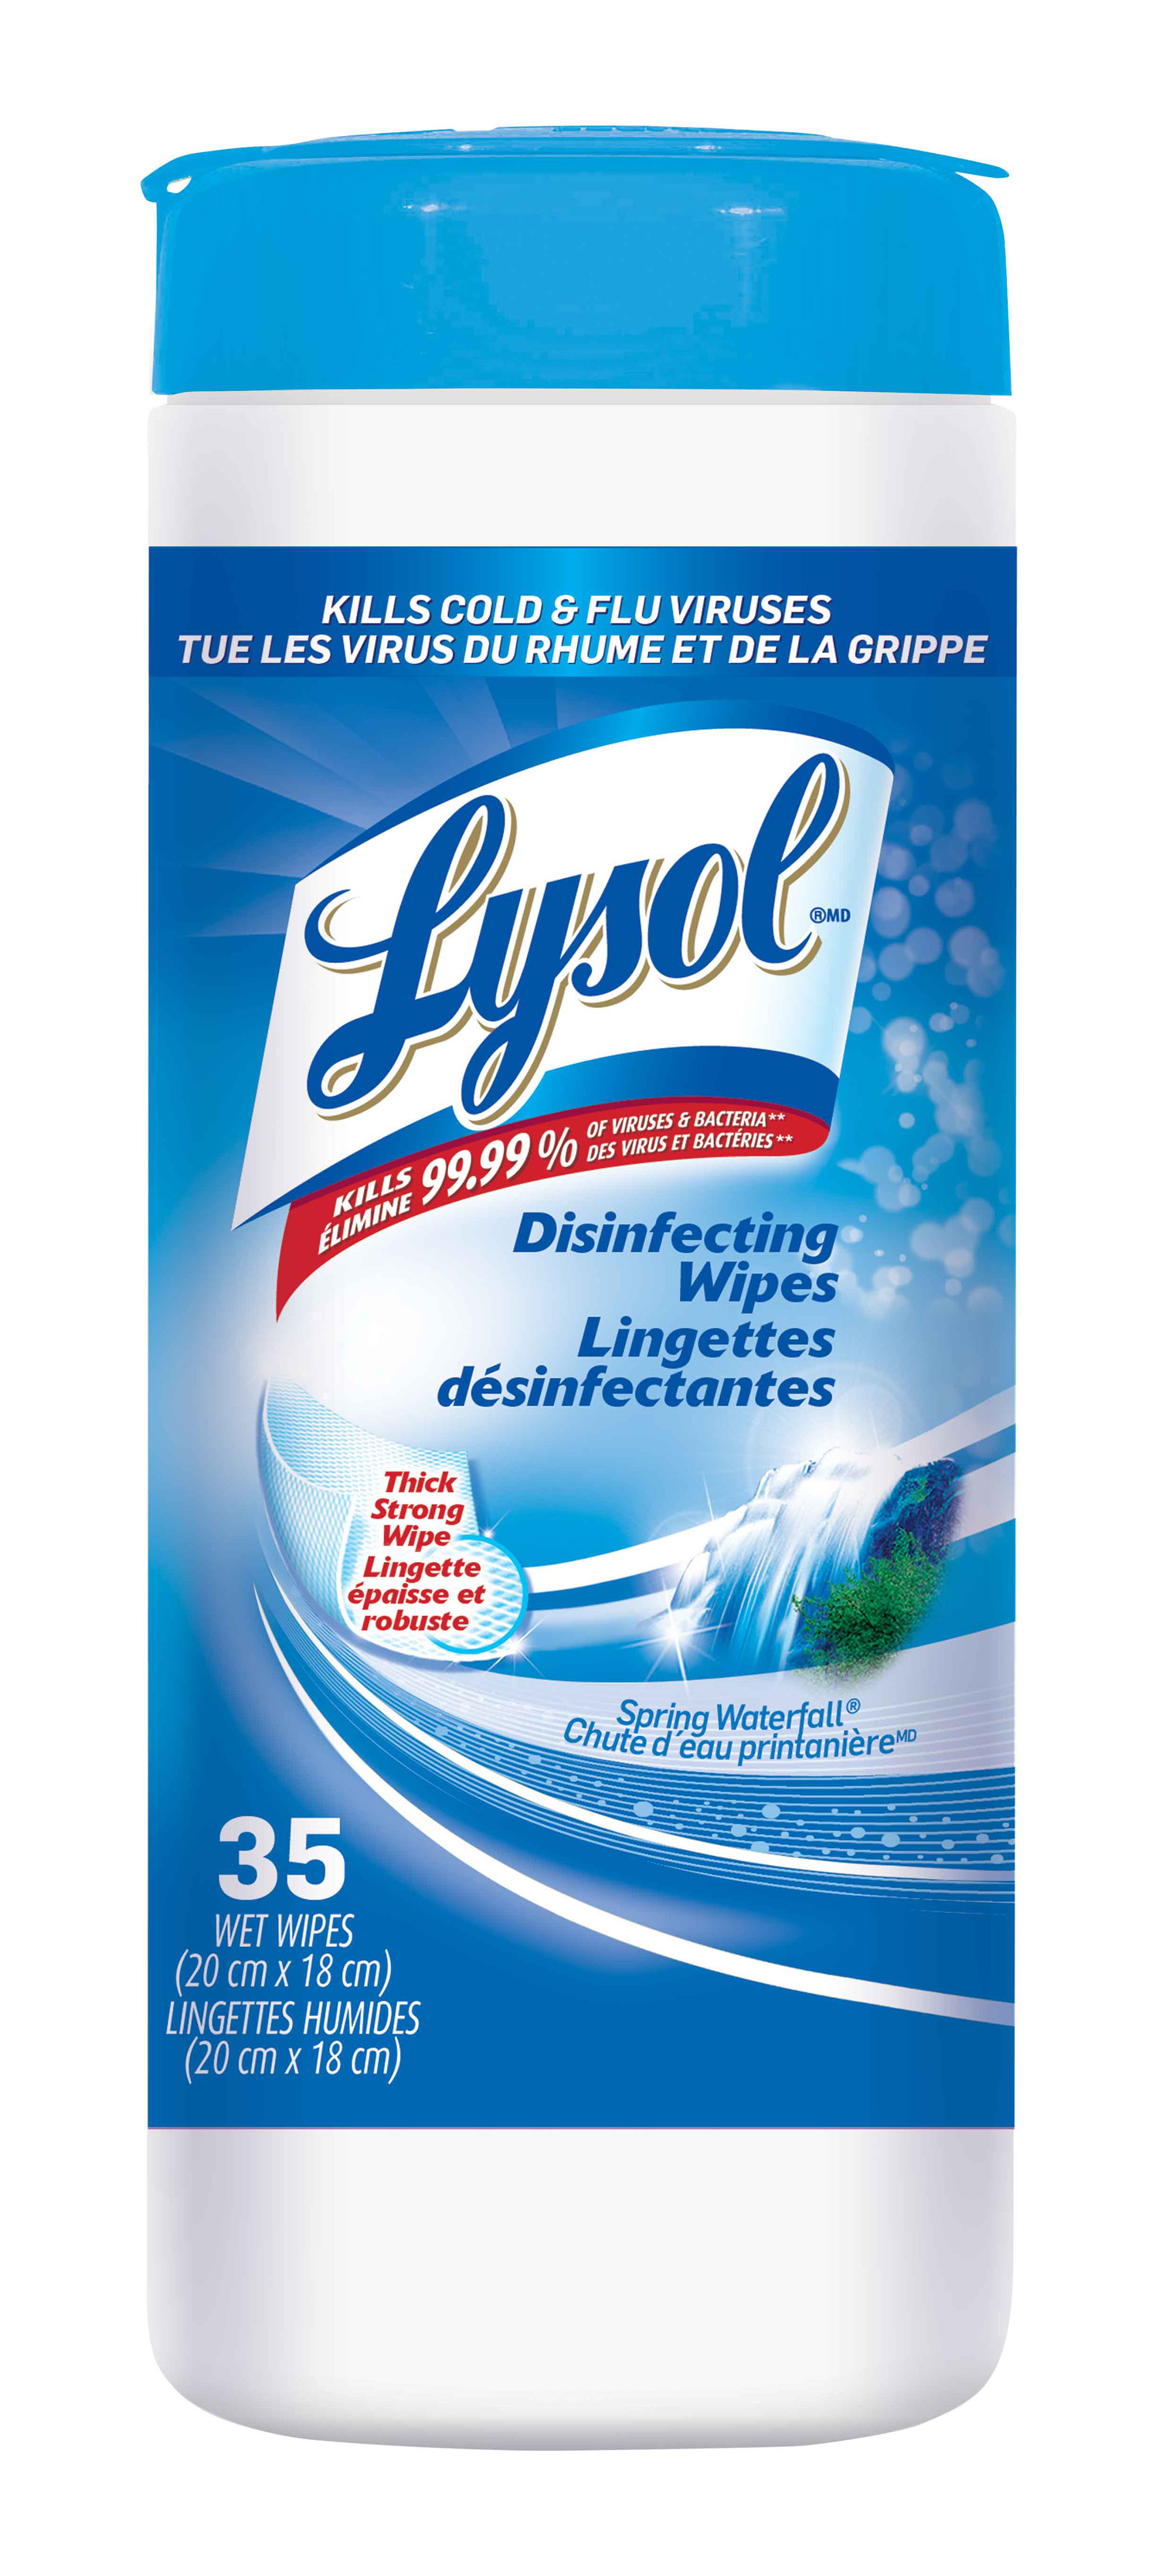 LYSOL® Disinfecting Wipes - Spring Waterfall (Canada)